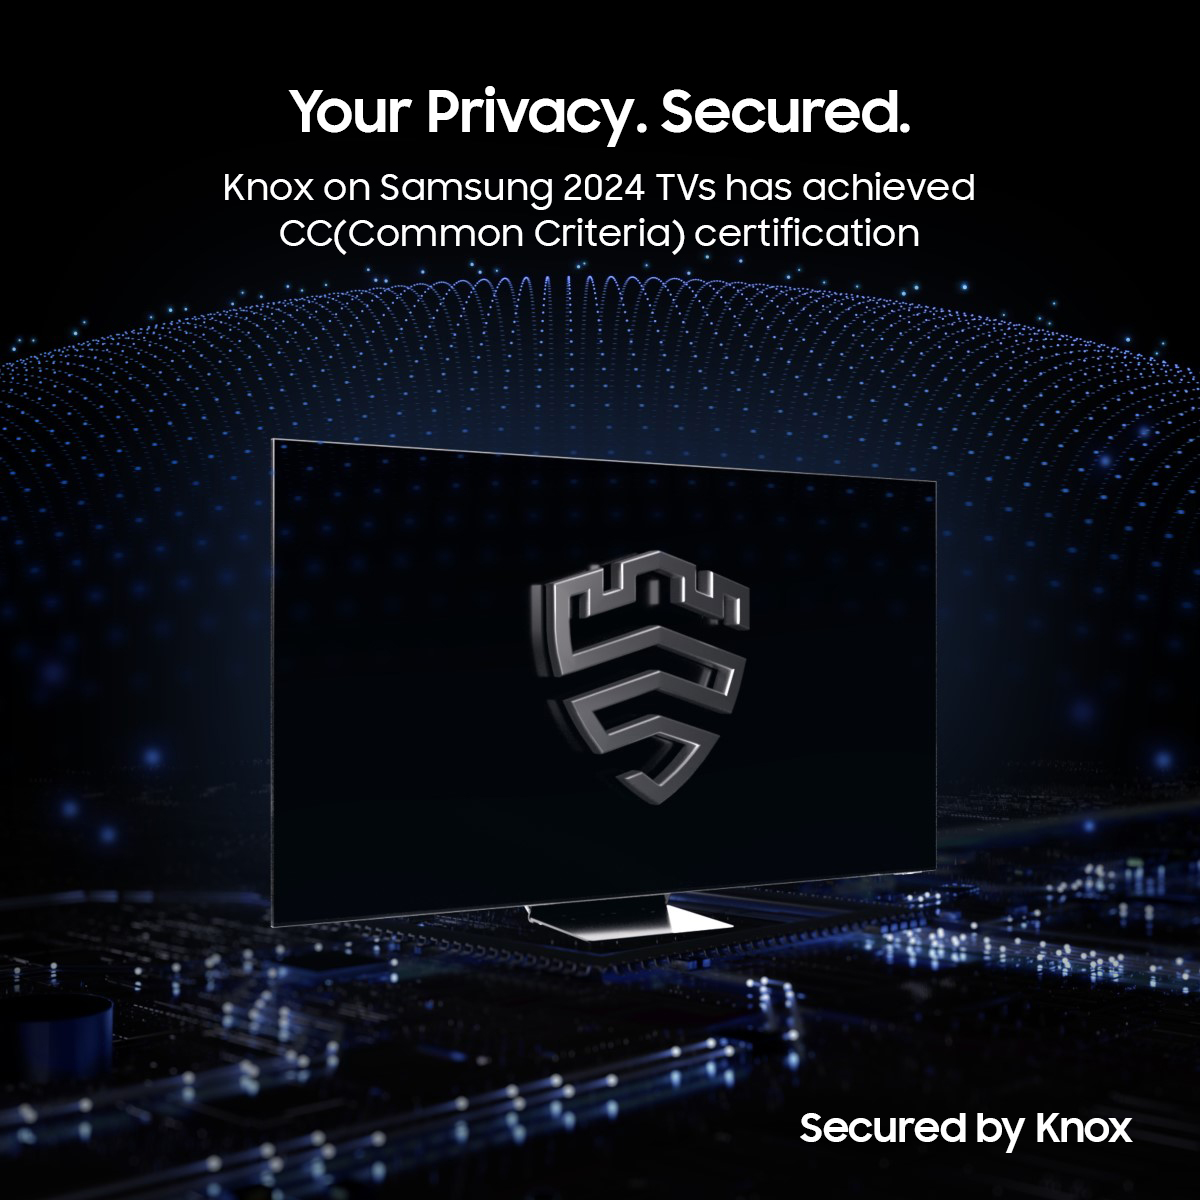 Samsung Smart TVs are built with security in mind, actively protecting against potential hacking threats. ✔ Smart home security ✔ Multi-layered security ✔ Phishing website blocking ✔ Regular updates smsng.co/knox-security #Privacy #SmartTV #SamsungKnox #SamsungTV #Samsung